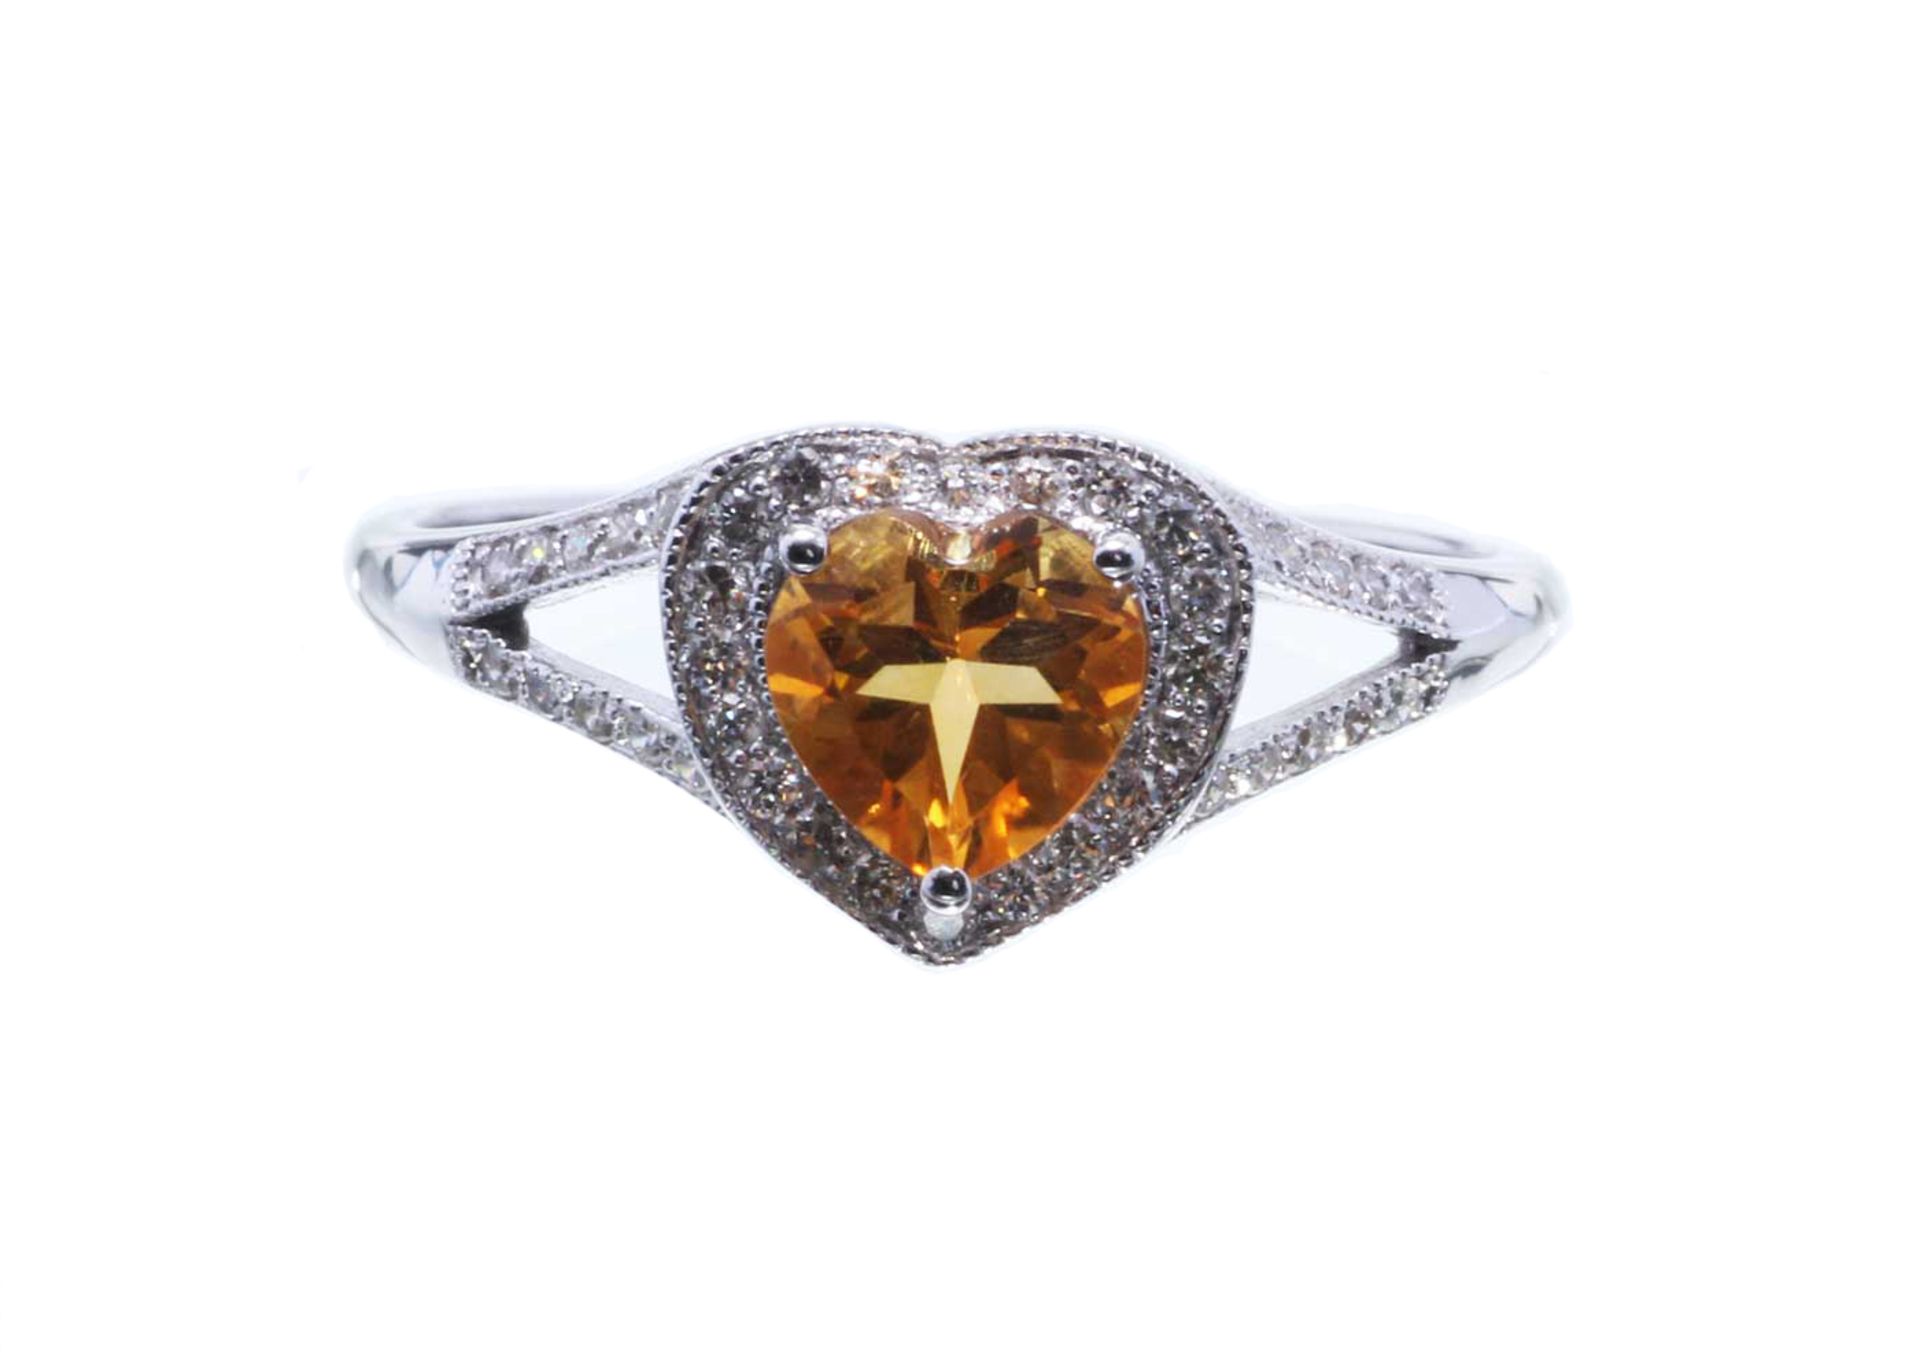 9ct White Gold Heart Shape Citrine Diamond Ring 0.20 Carats - Valued by AGI £1,495.00 - 9ct White - Image 4 of 4